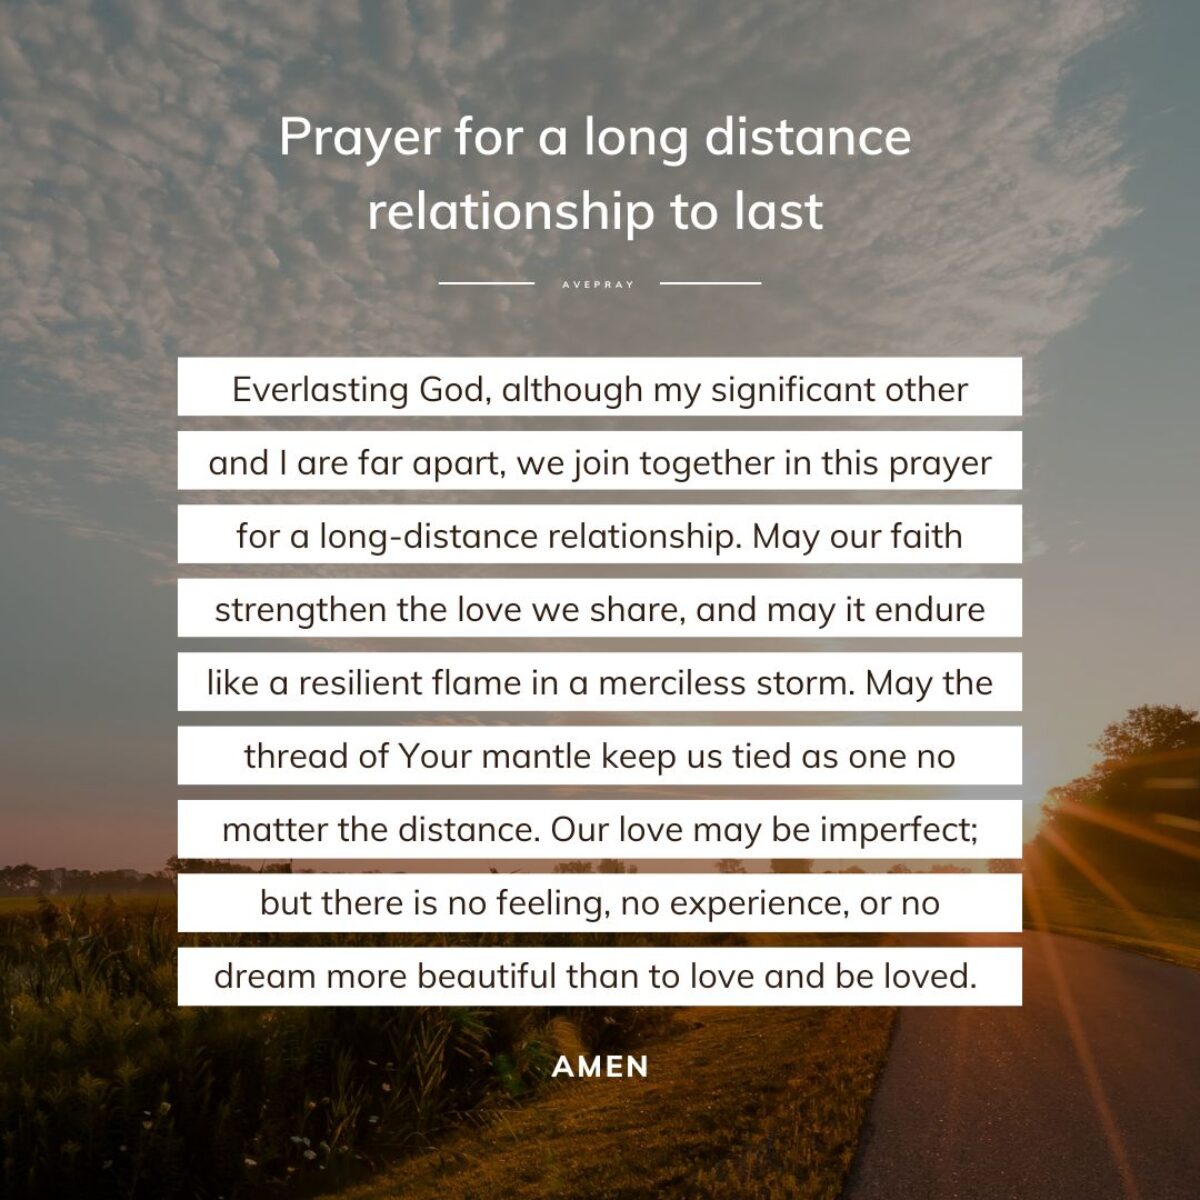 Prayer for a long distance relationship to last – AvePray